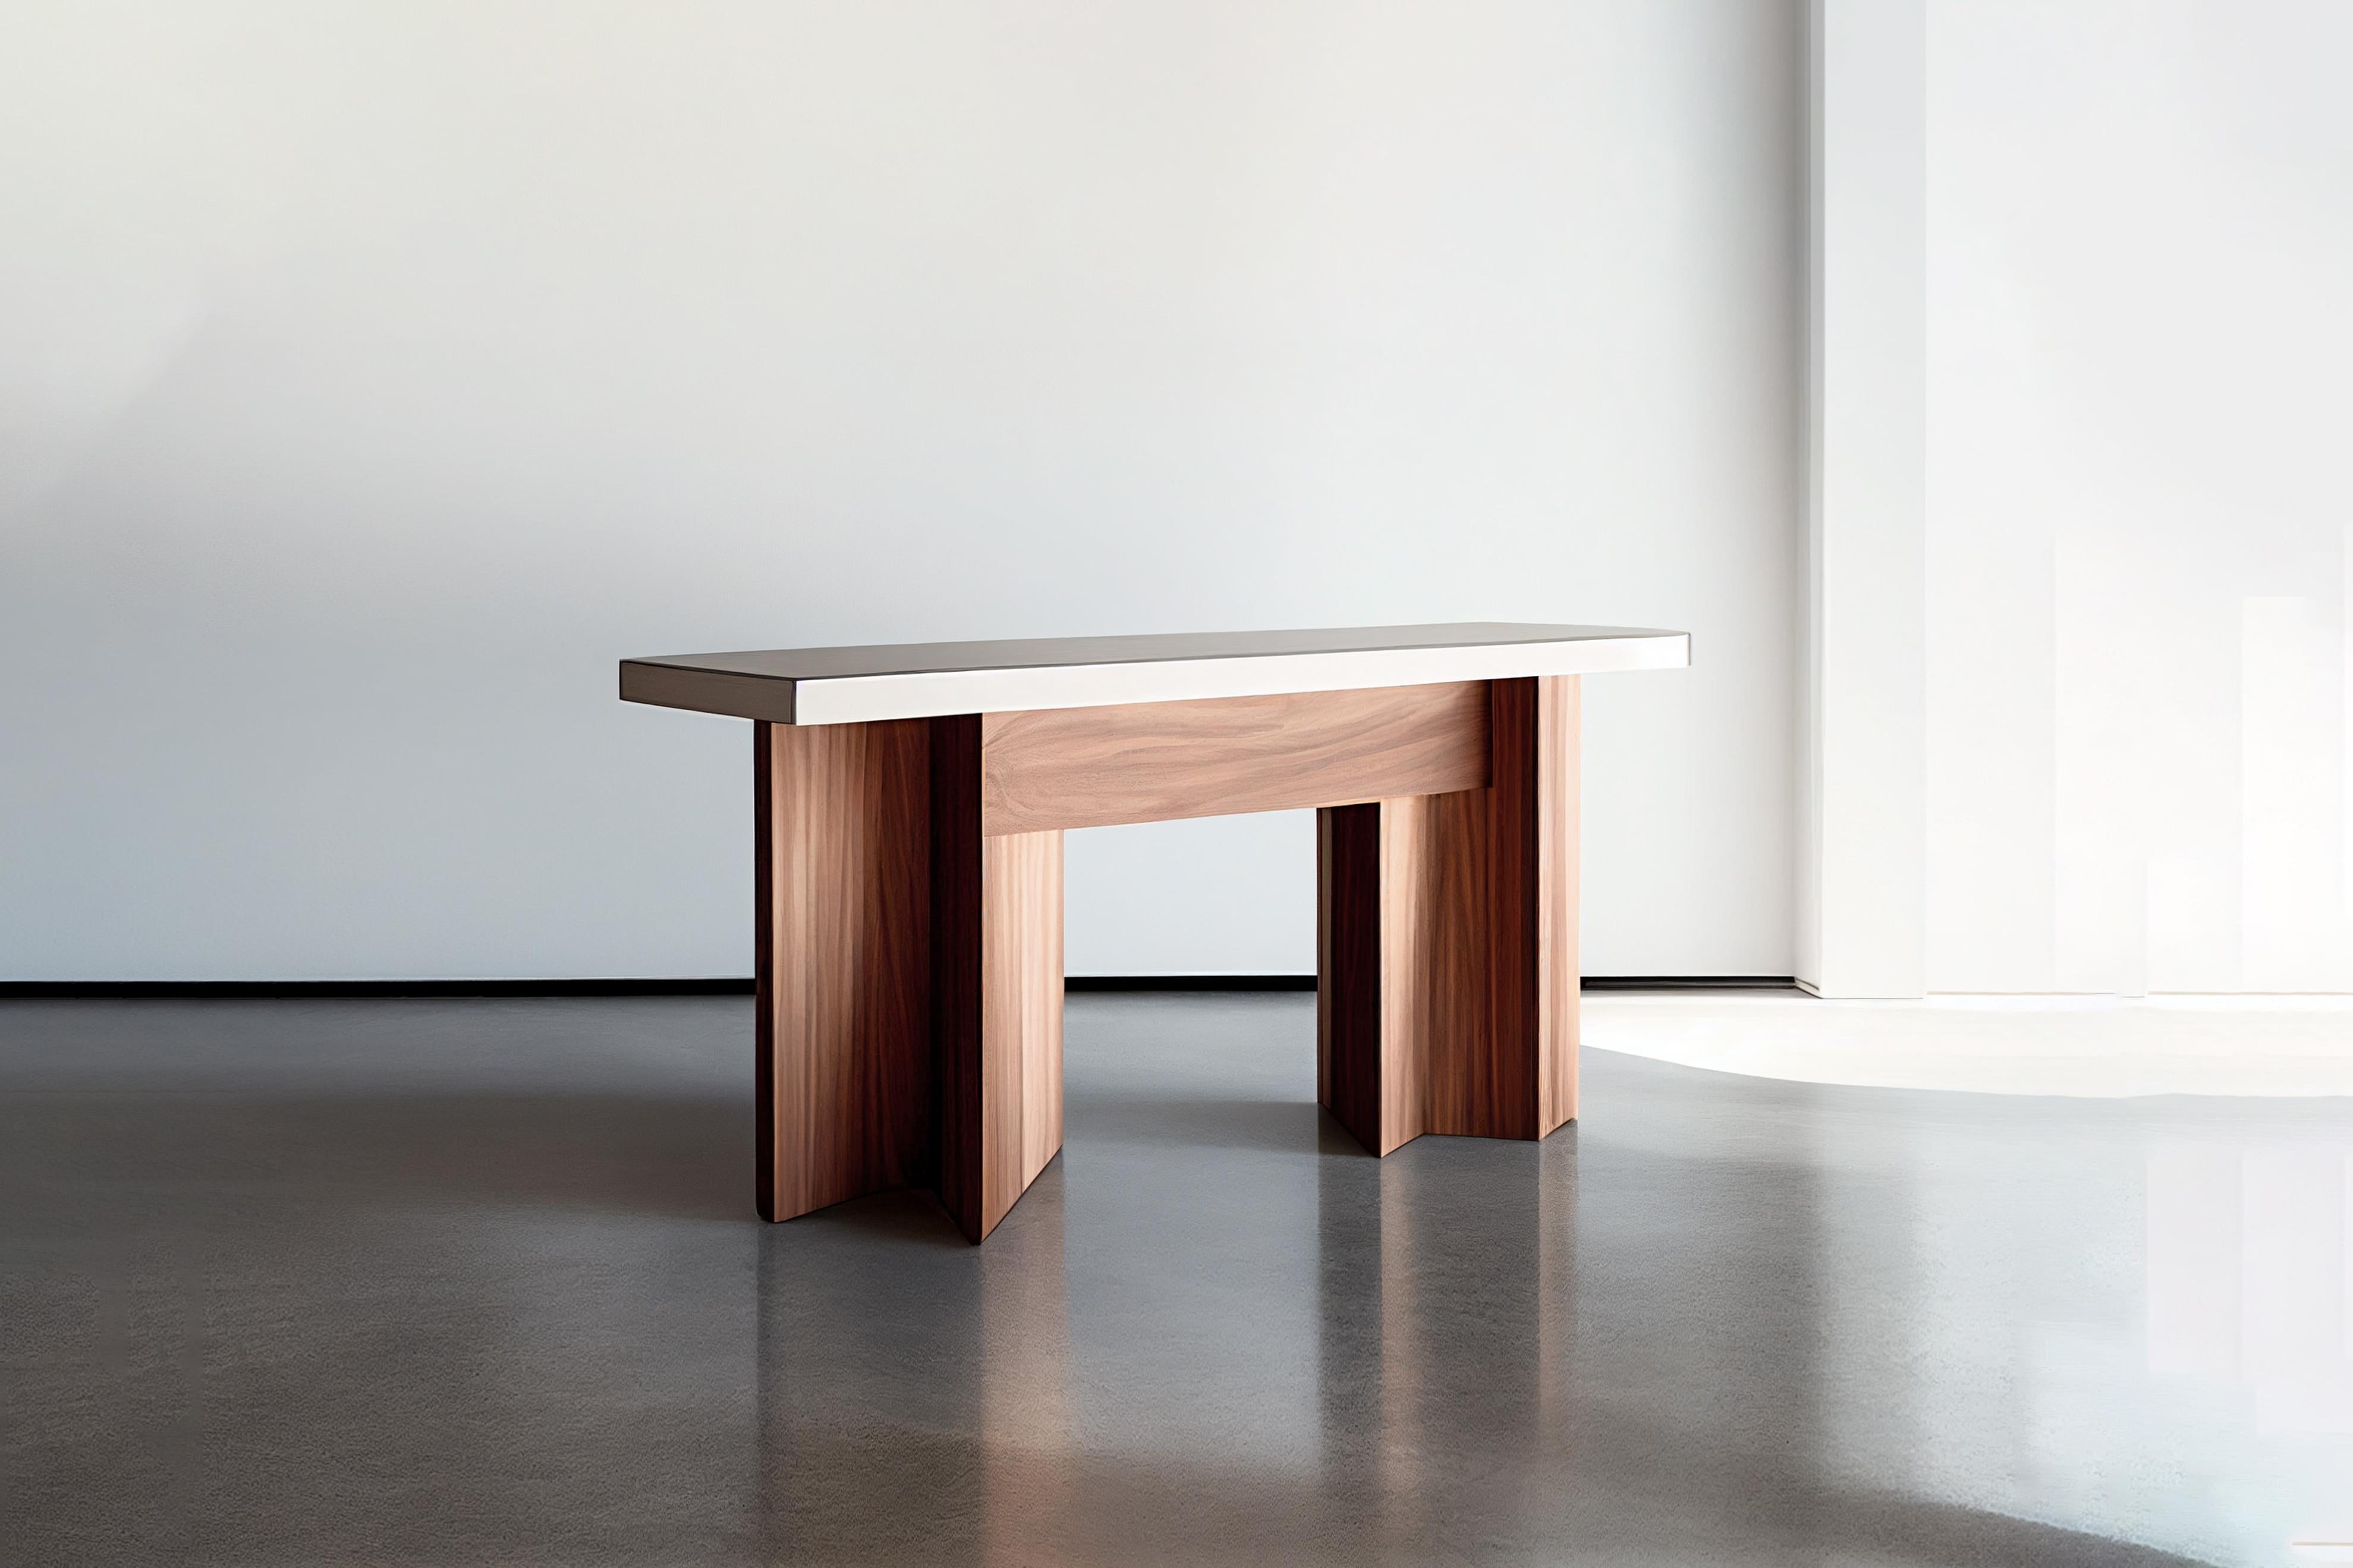 Console made of solid walnut wood stained with a water-based dye and finished with matt polyurethane.
——

NONO is a Mexican design brand with more than 10 years of experience dedicated to the production of interior furnishings, editions, and